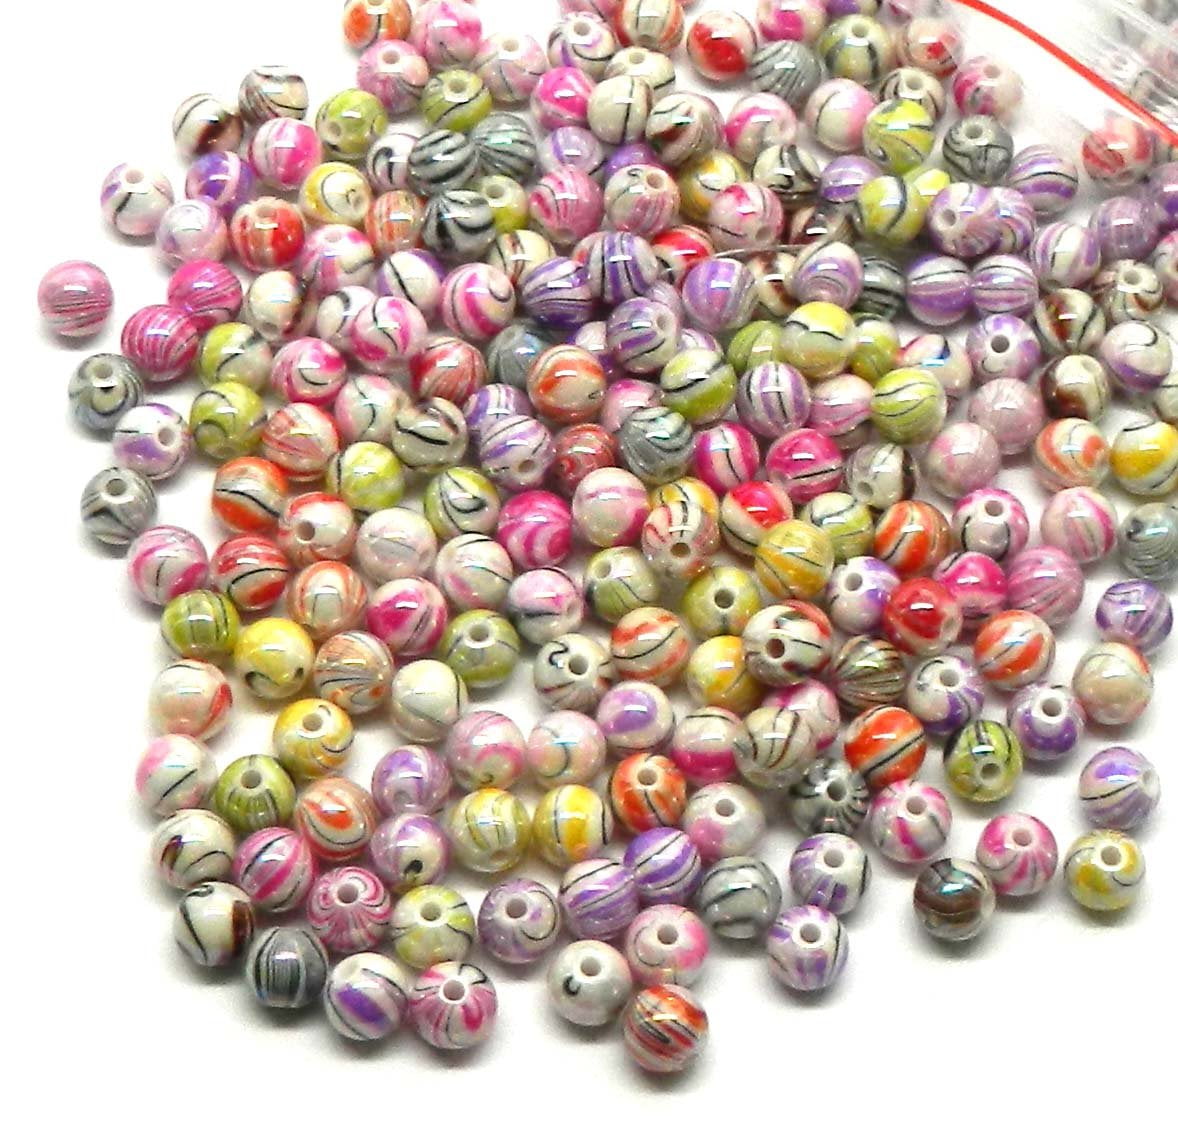 300 New Charms Mixed Wooden Round Smooth Loose Ball Craft Spacer Beads 6mm 